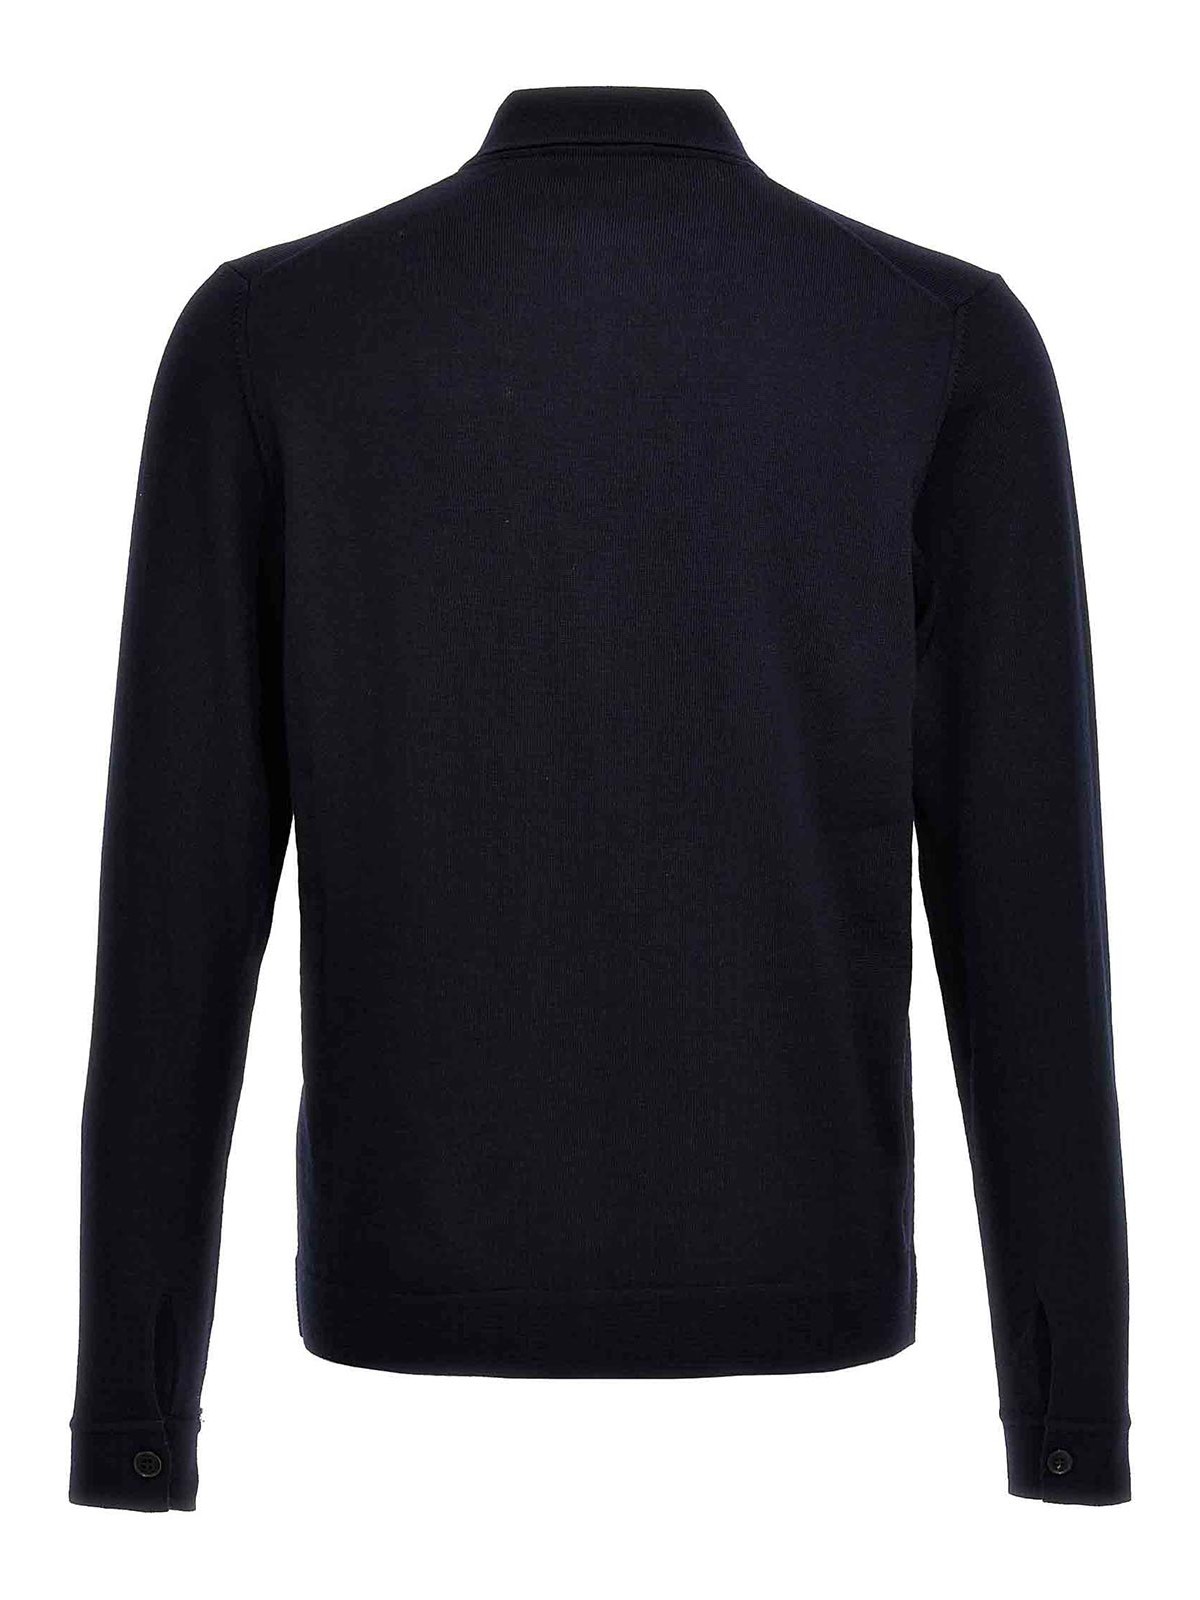 Shop Roberto Collina Knitted Shirt In Blue